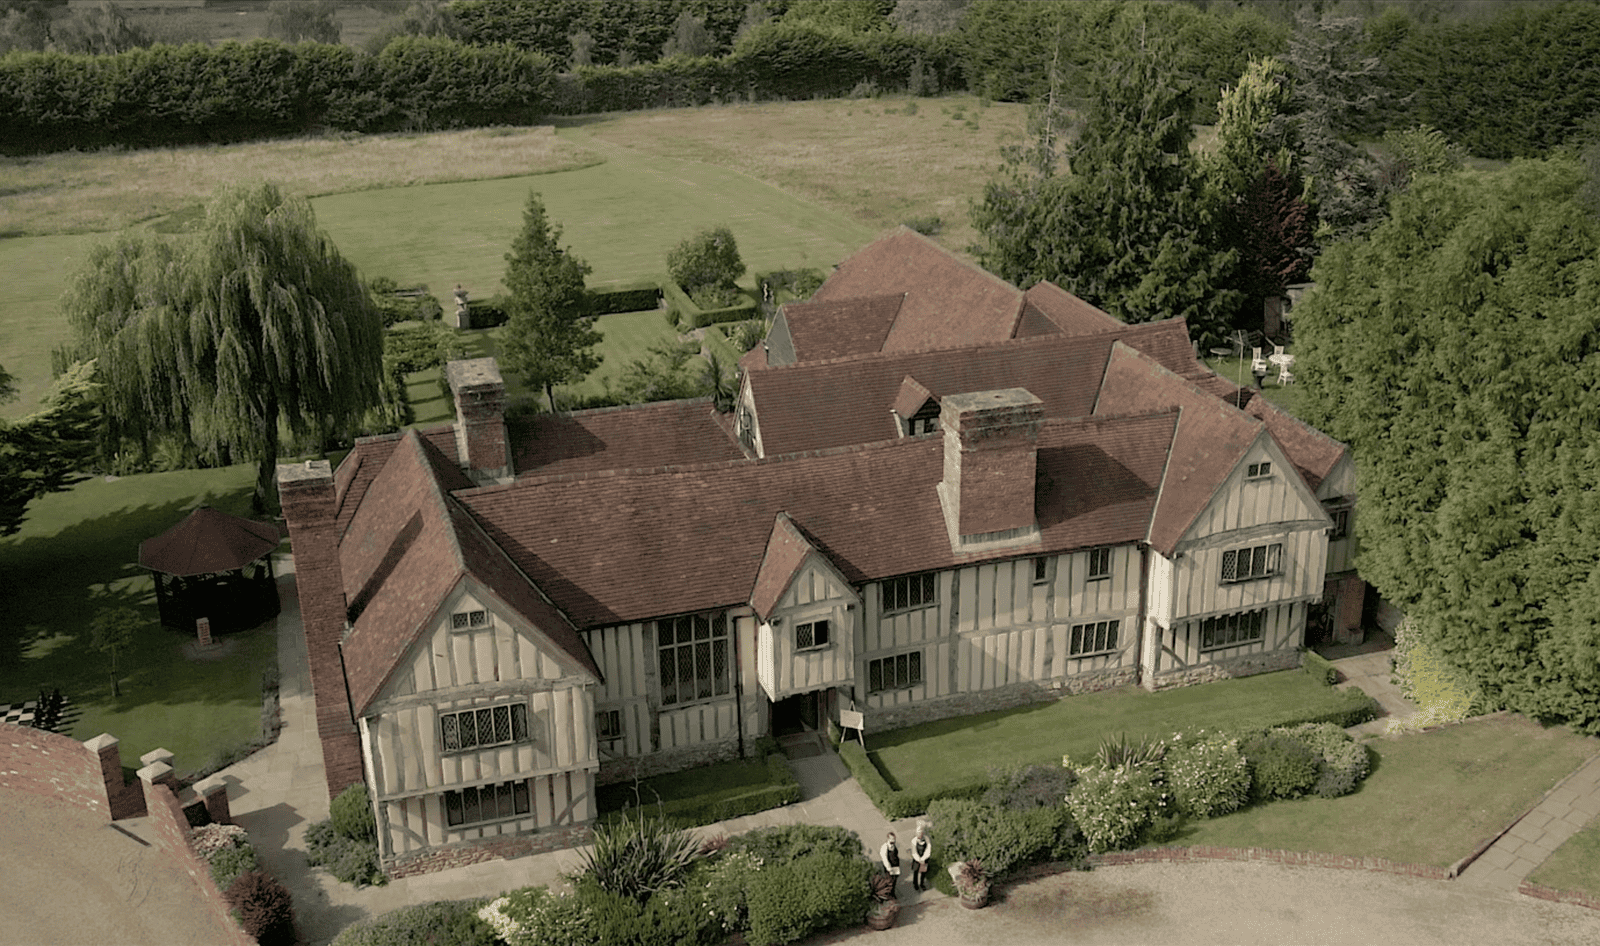 Aerial view of Cain Manor in Hampshire on a wedding day. The front of the property is bathed in soft light, surrounded by lush greenery, creating a romantic and enchanting atmosphere for the celebration